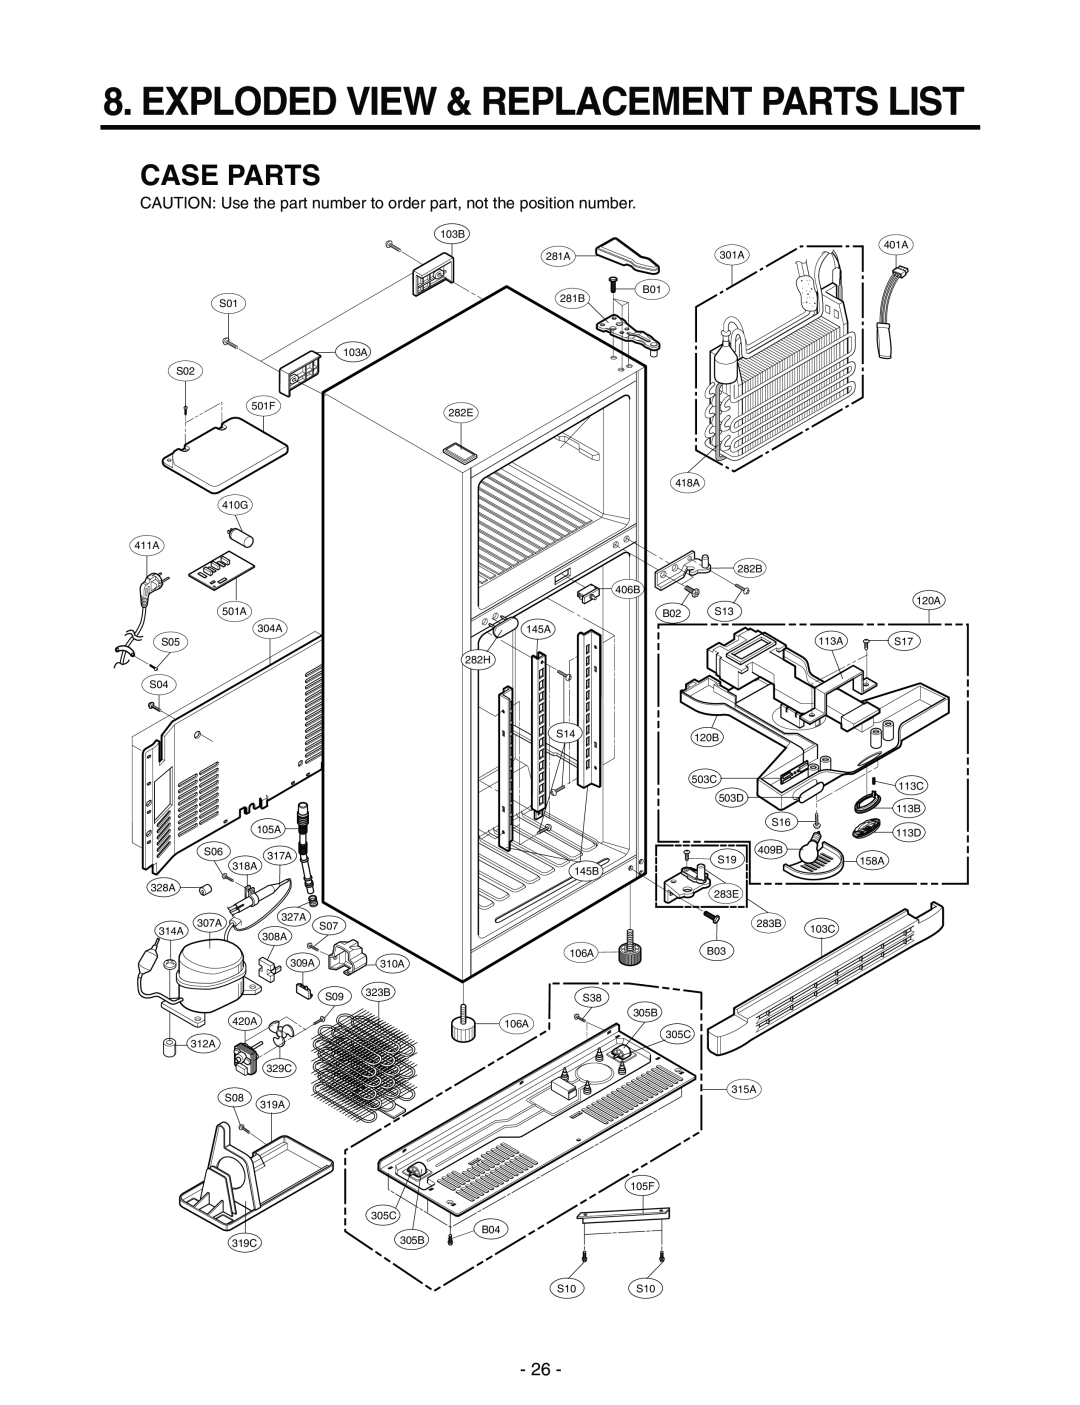 LG Electronics LRTN22310, LRTN19310 service manual Exploded View & Replacement Parts List, Case Parts 